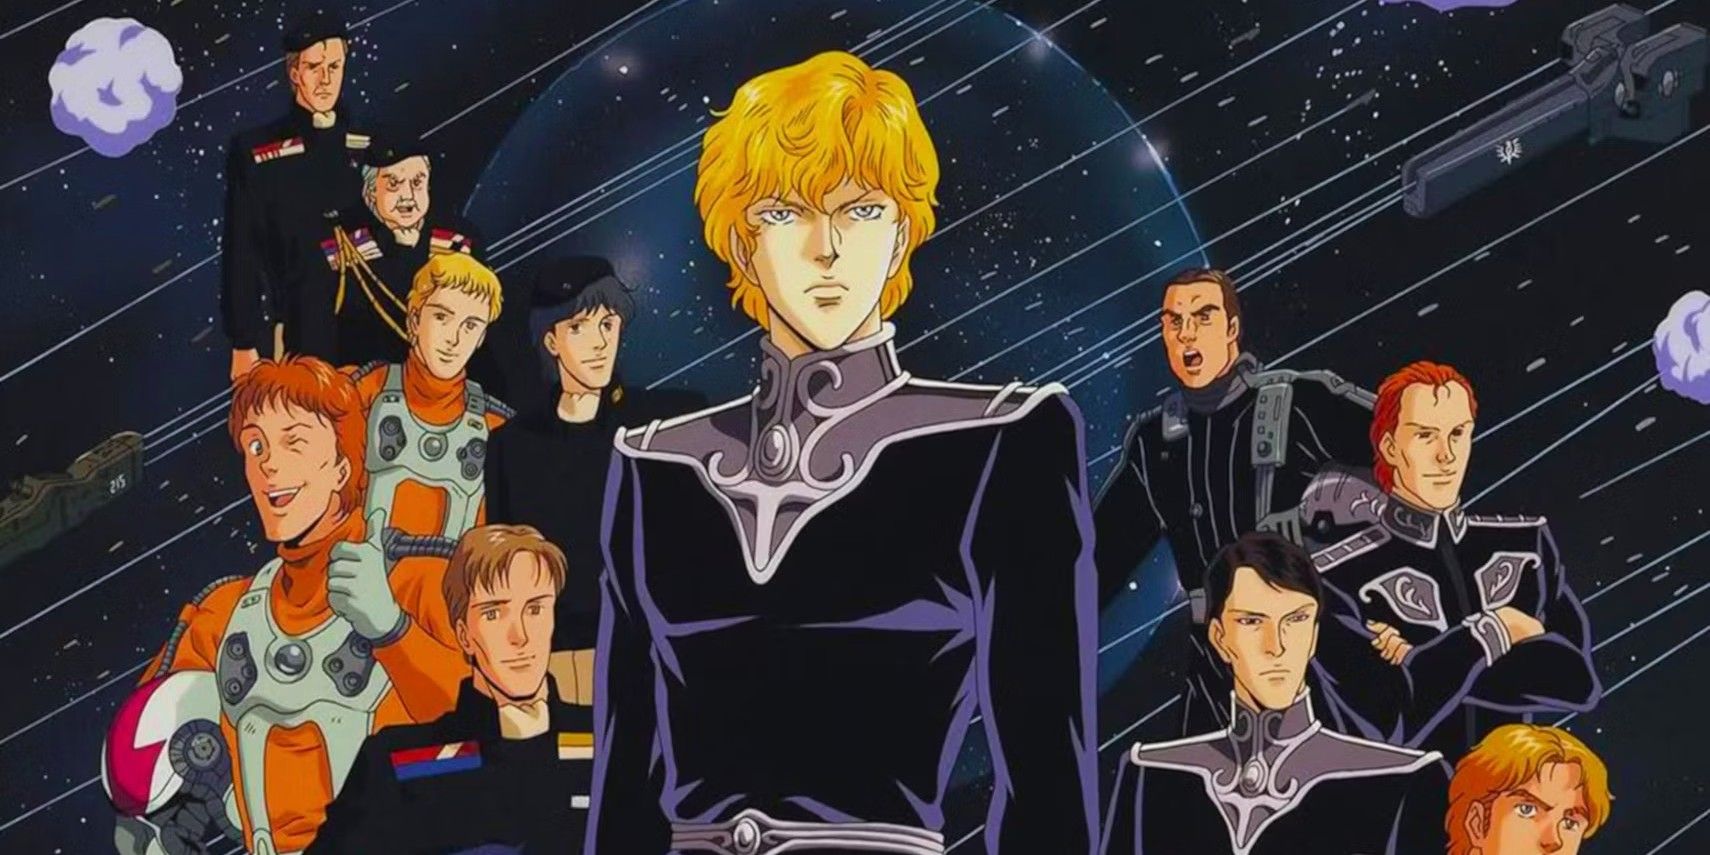 10 '80s Anime Characters With The Best Fashion Sense